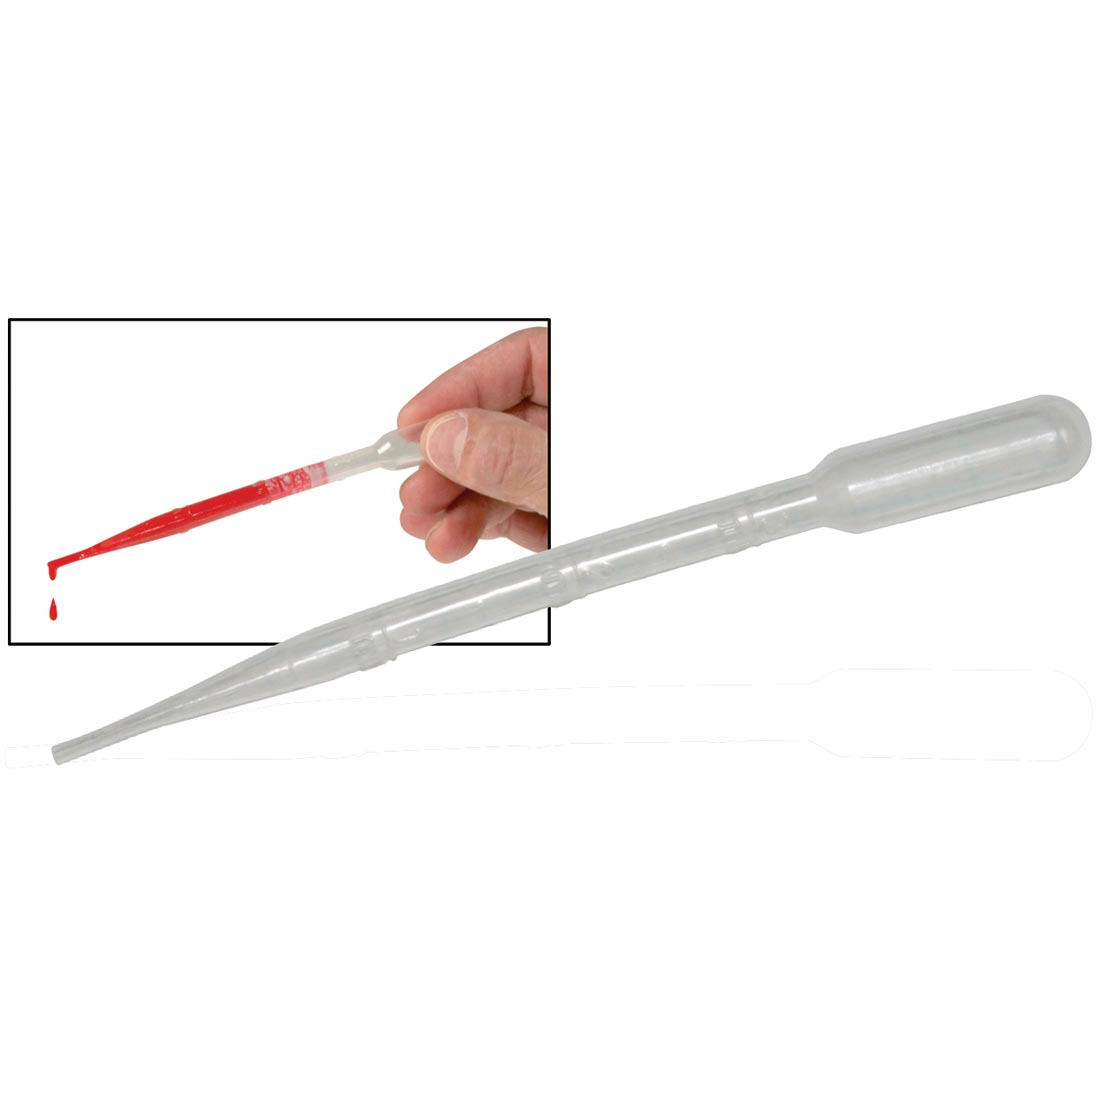 Richeson Paint Pipette with inset picture of a hand using one with a red liquid